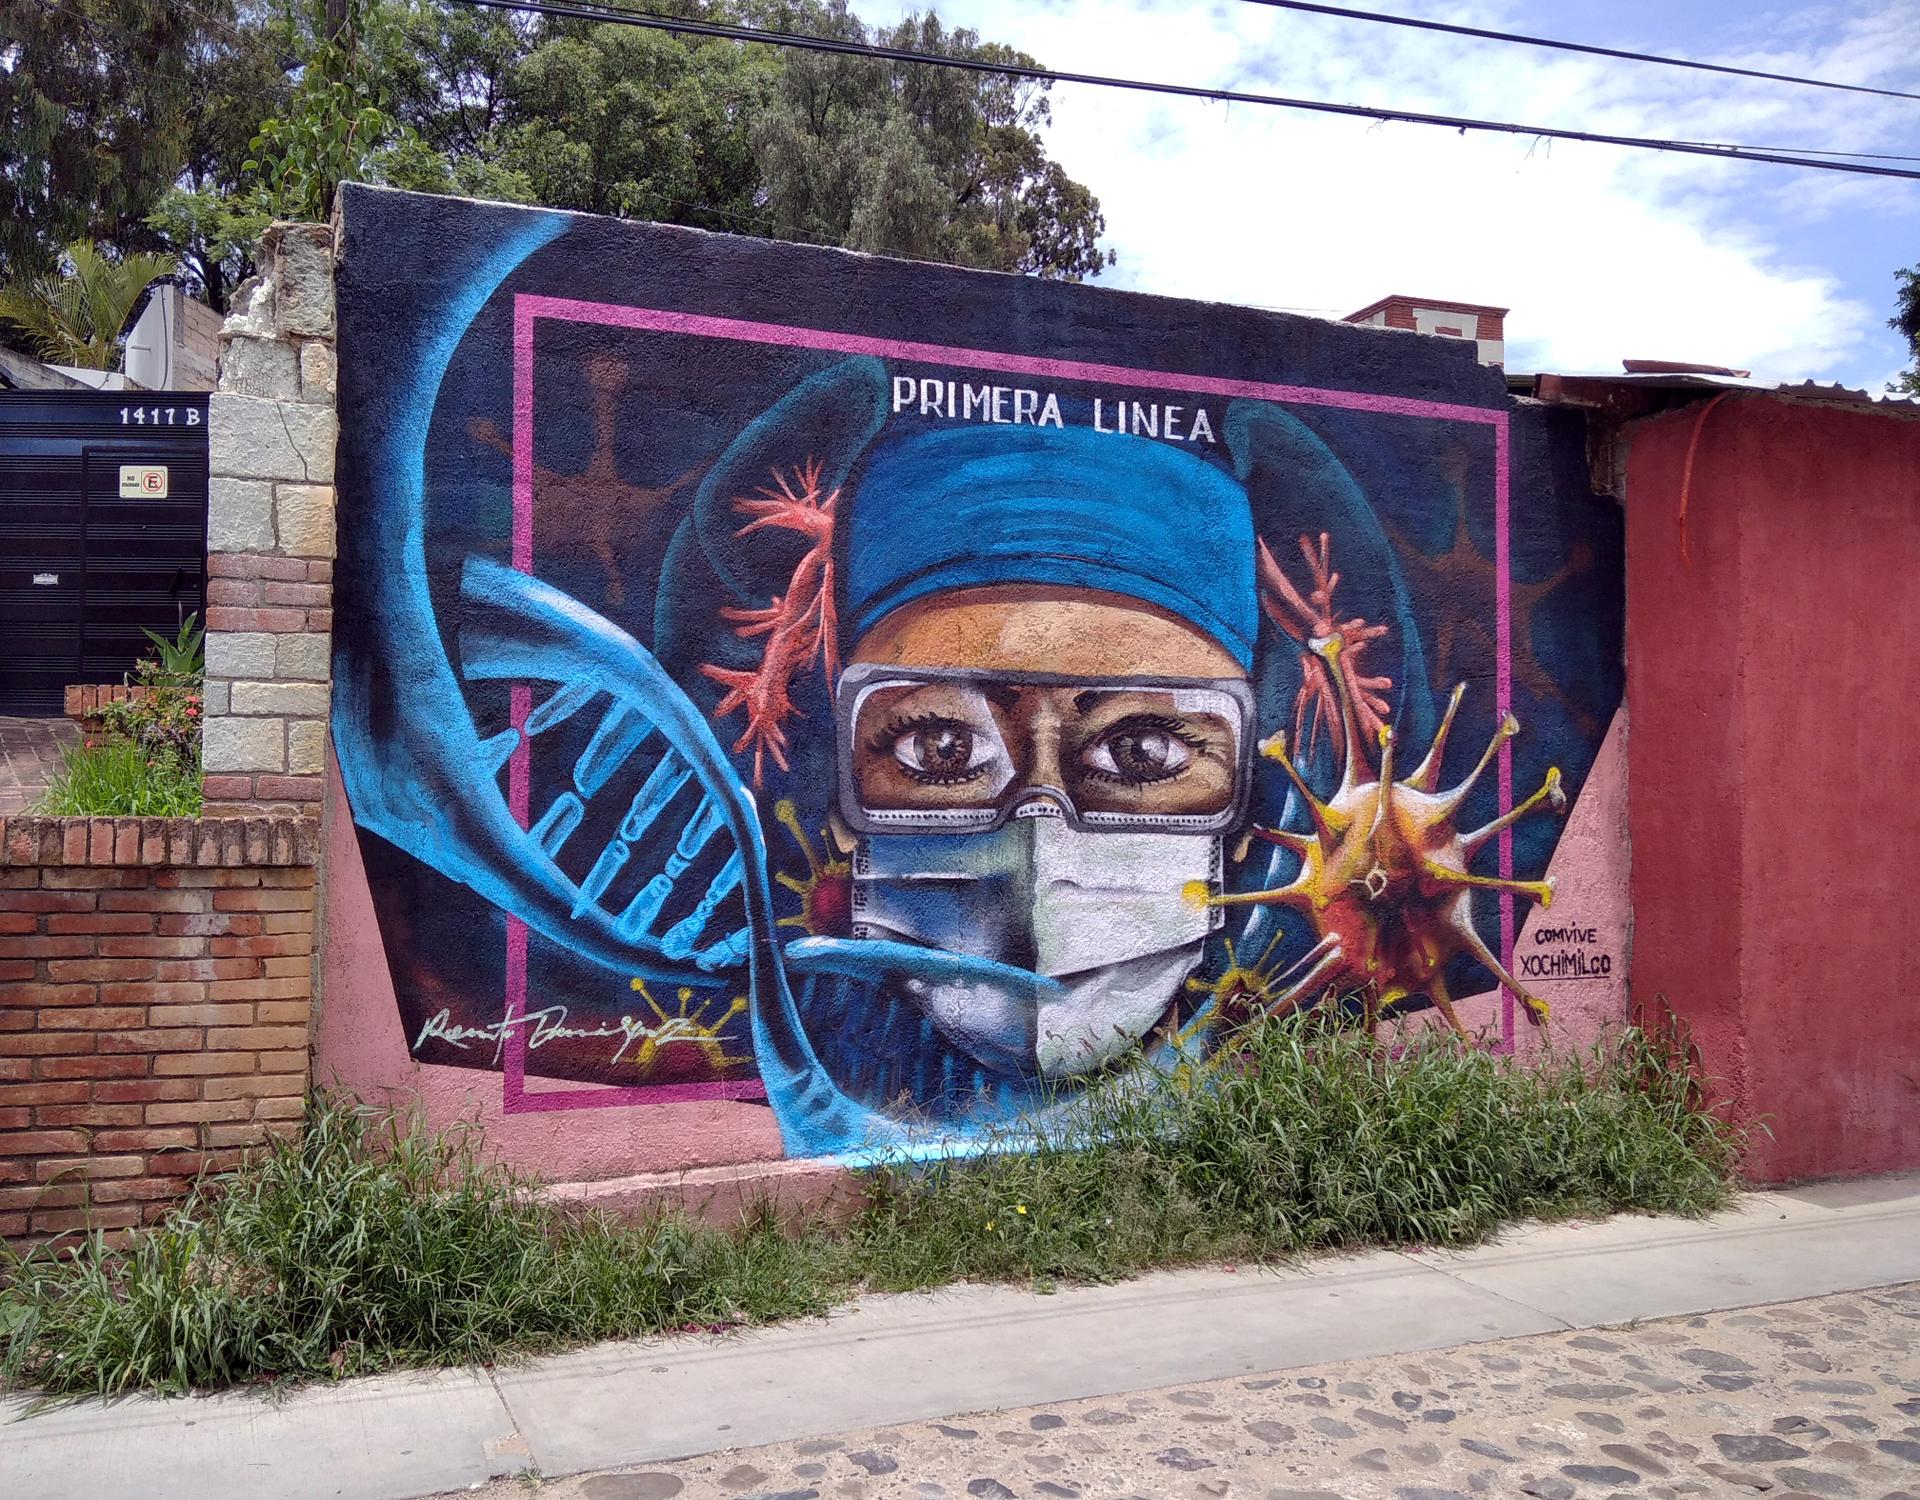 A mural near a federal IMSS hospital in Oaxaca City, Mexico, commissioned by a neighborhood organization to honor healthcare workers fighting the pandemic.